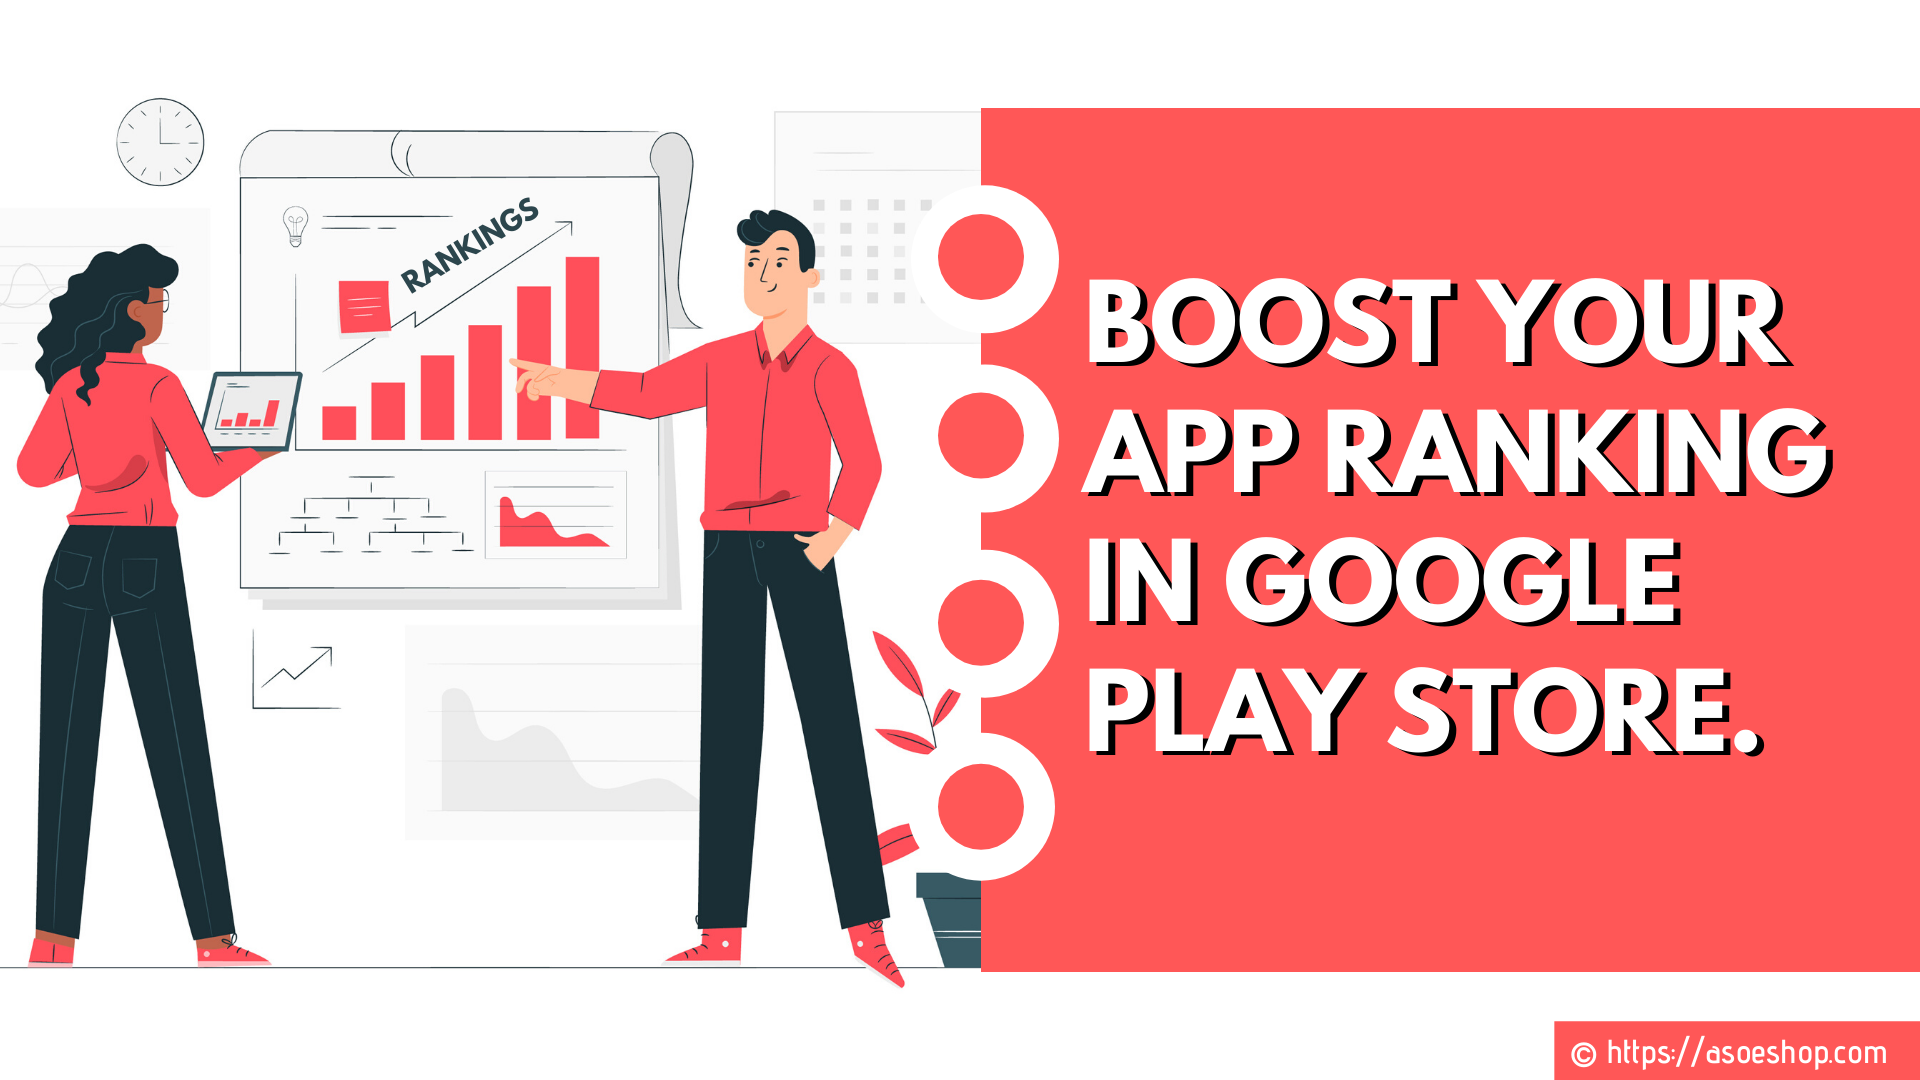 Buy Keyword Installs to Boost your App Ranking in Google Play Store.